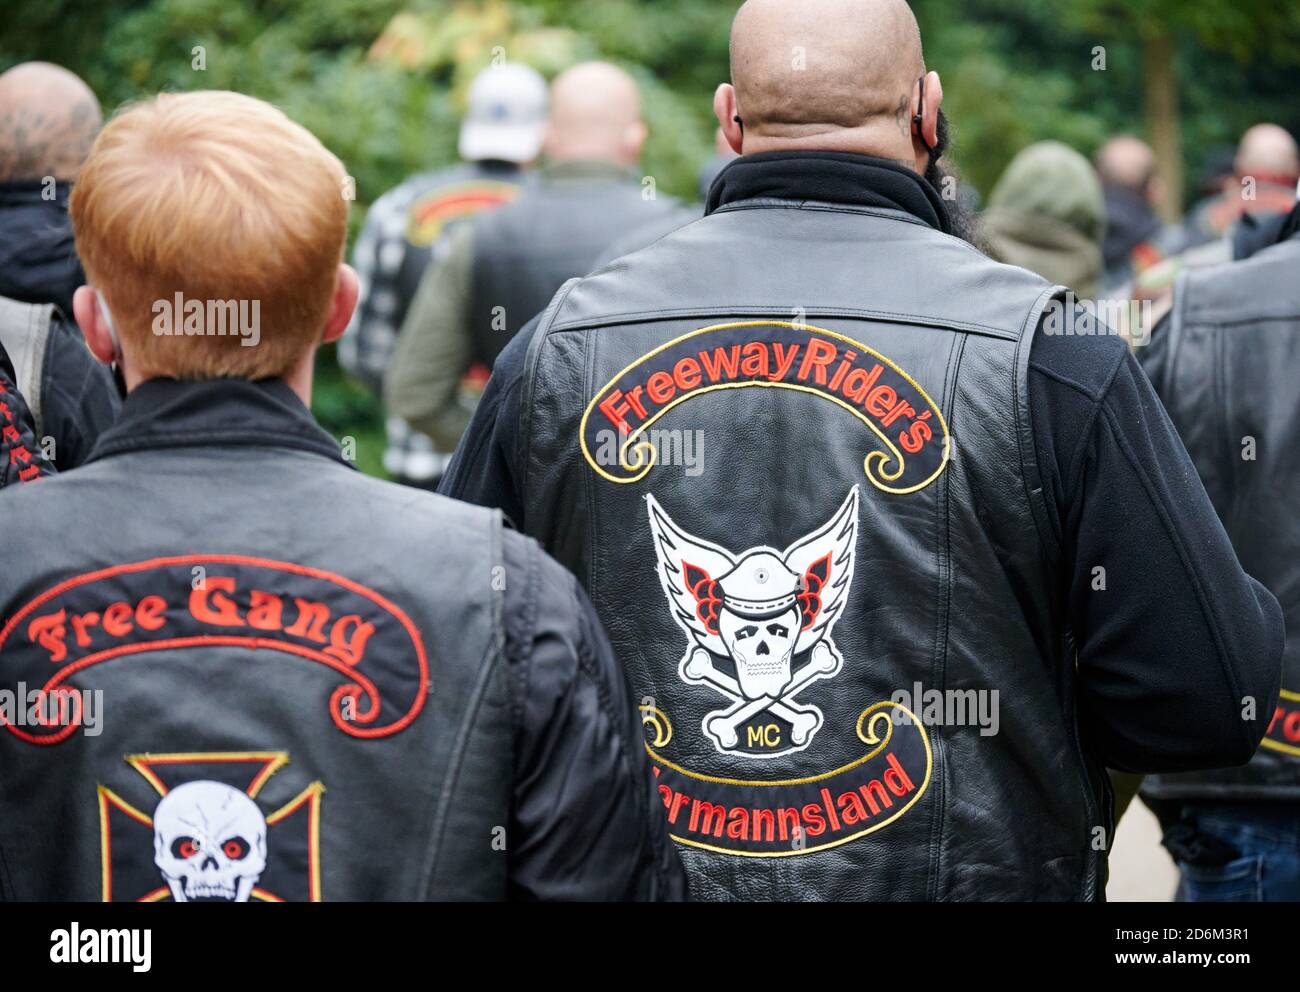 Gelsenkirchen, Germany. 18th Oct, 2020. Participants parade through the city in a funeral march in memory of a member of the rocker group 'Freeway Riders' who was killed in 2018. After an argument in the rocker milieu, the member of the 'Freeway Riders' had been stabbed to death on the open street on October 13, 2018. Credit: Henning Kaiser/dpa/Alamy Live News Stock Photo